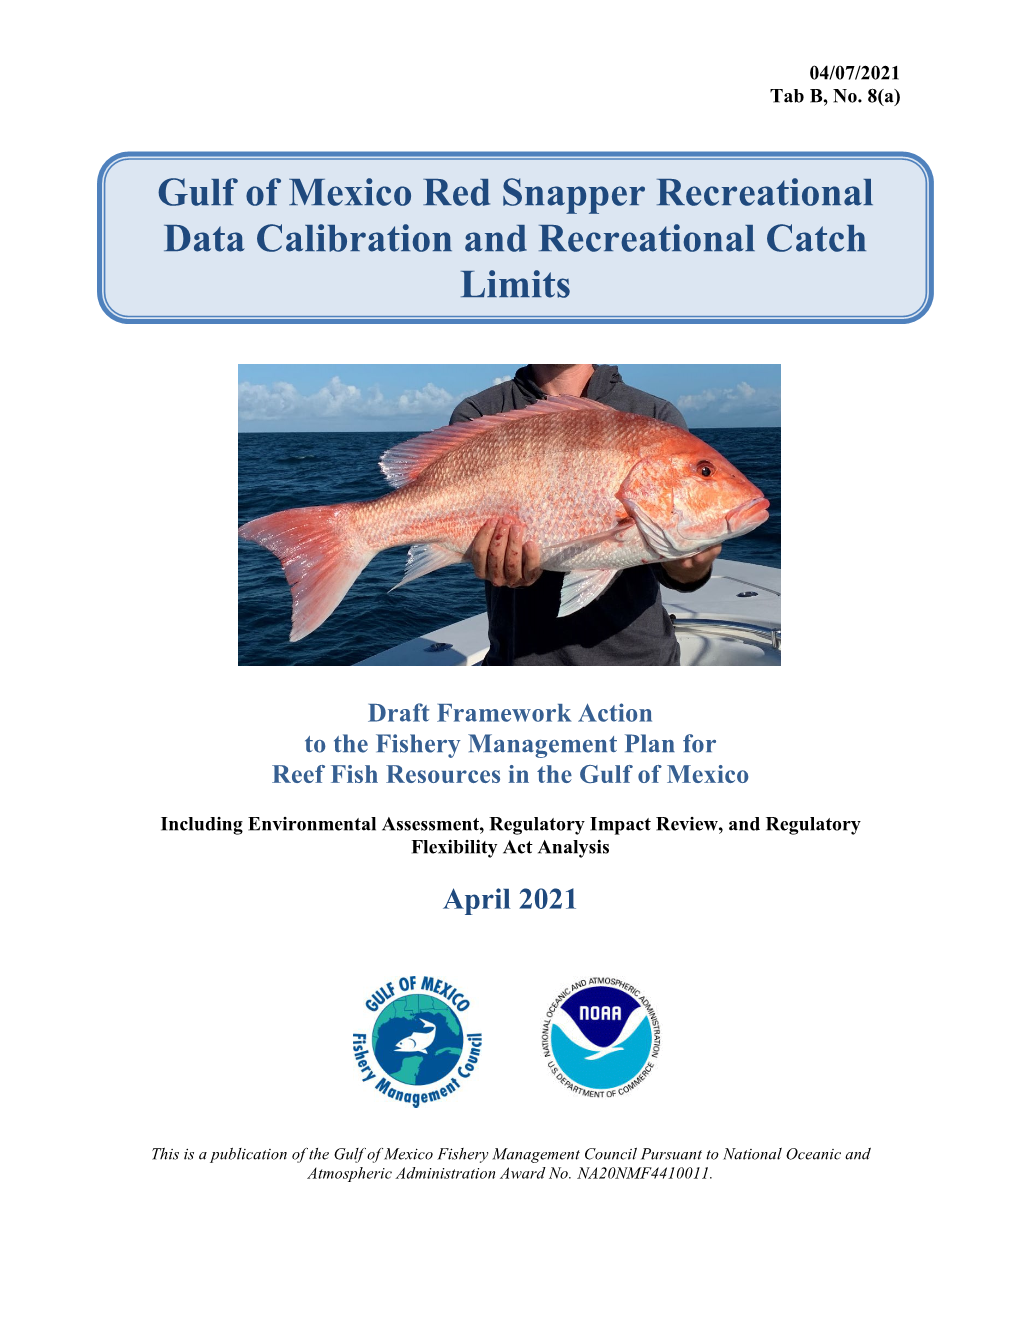 Modification of Fishing Access in Eastern Gulf of Mexico Marine